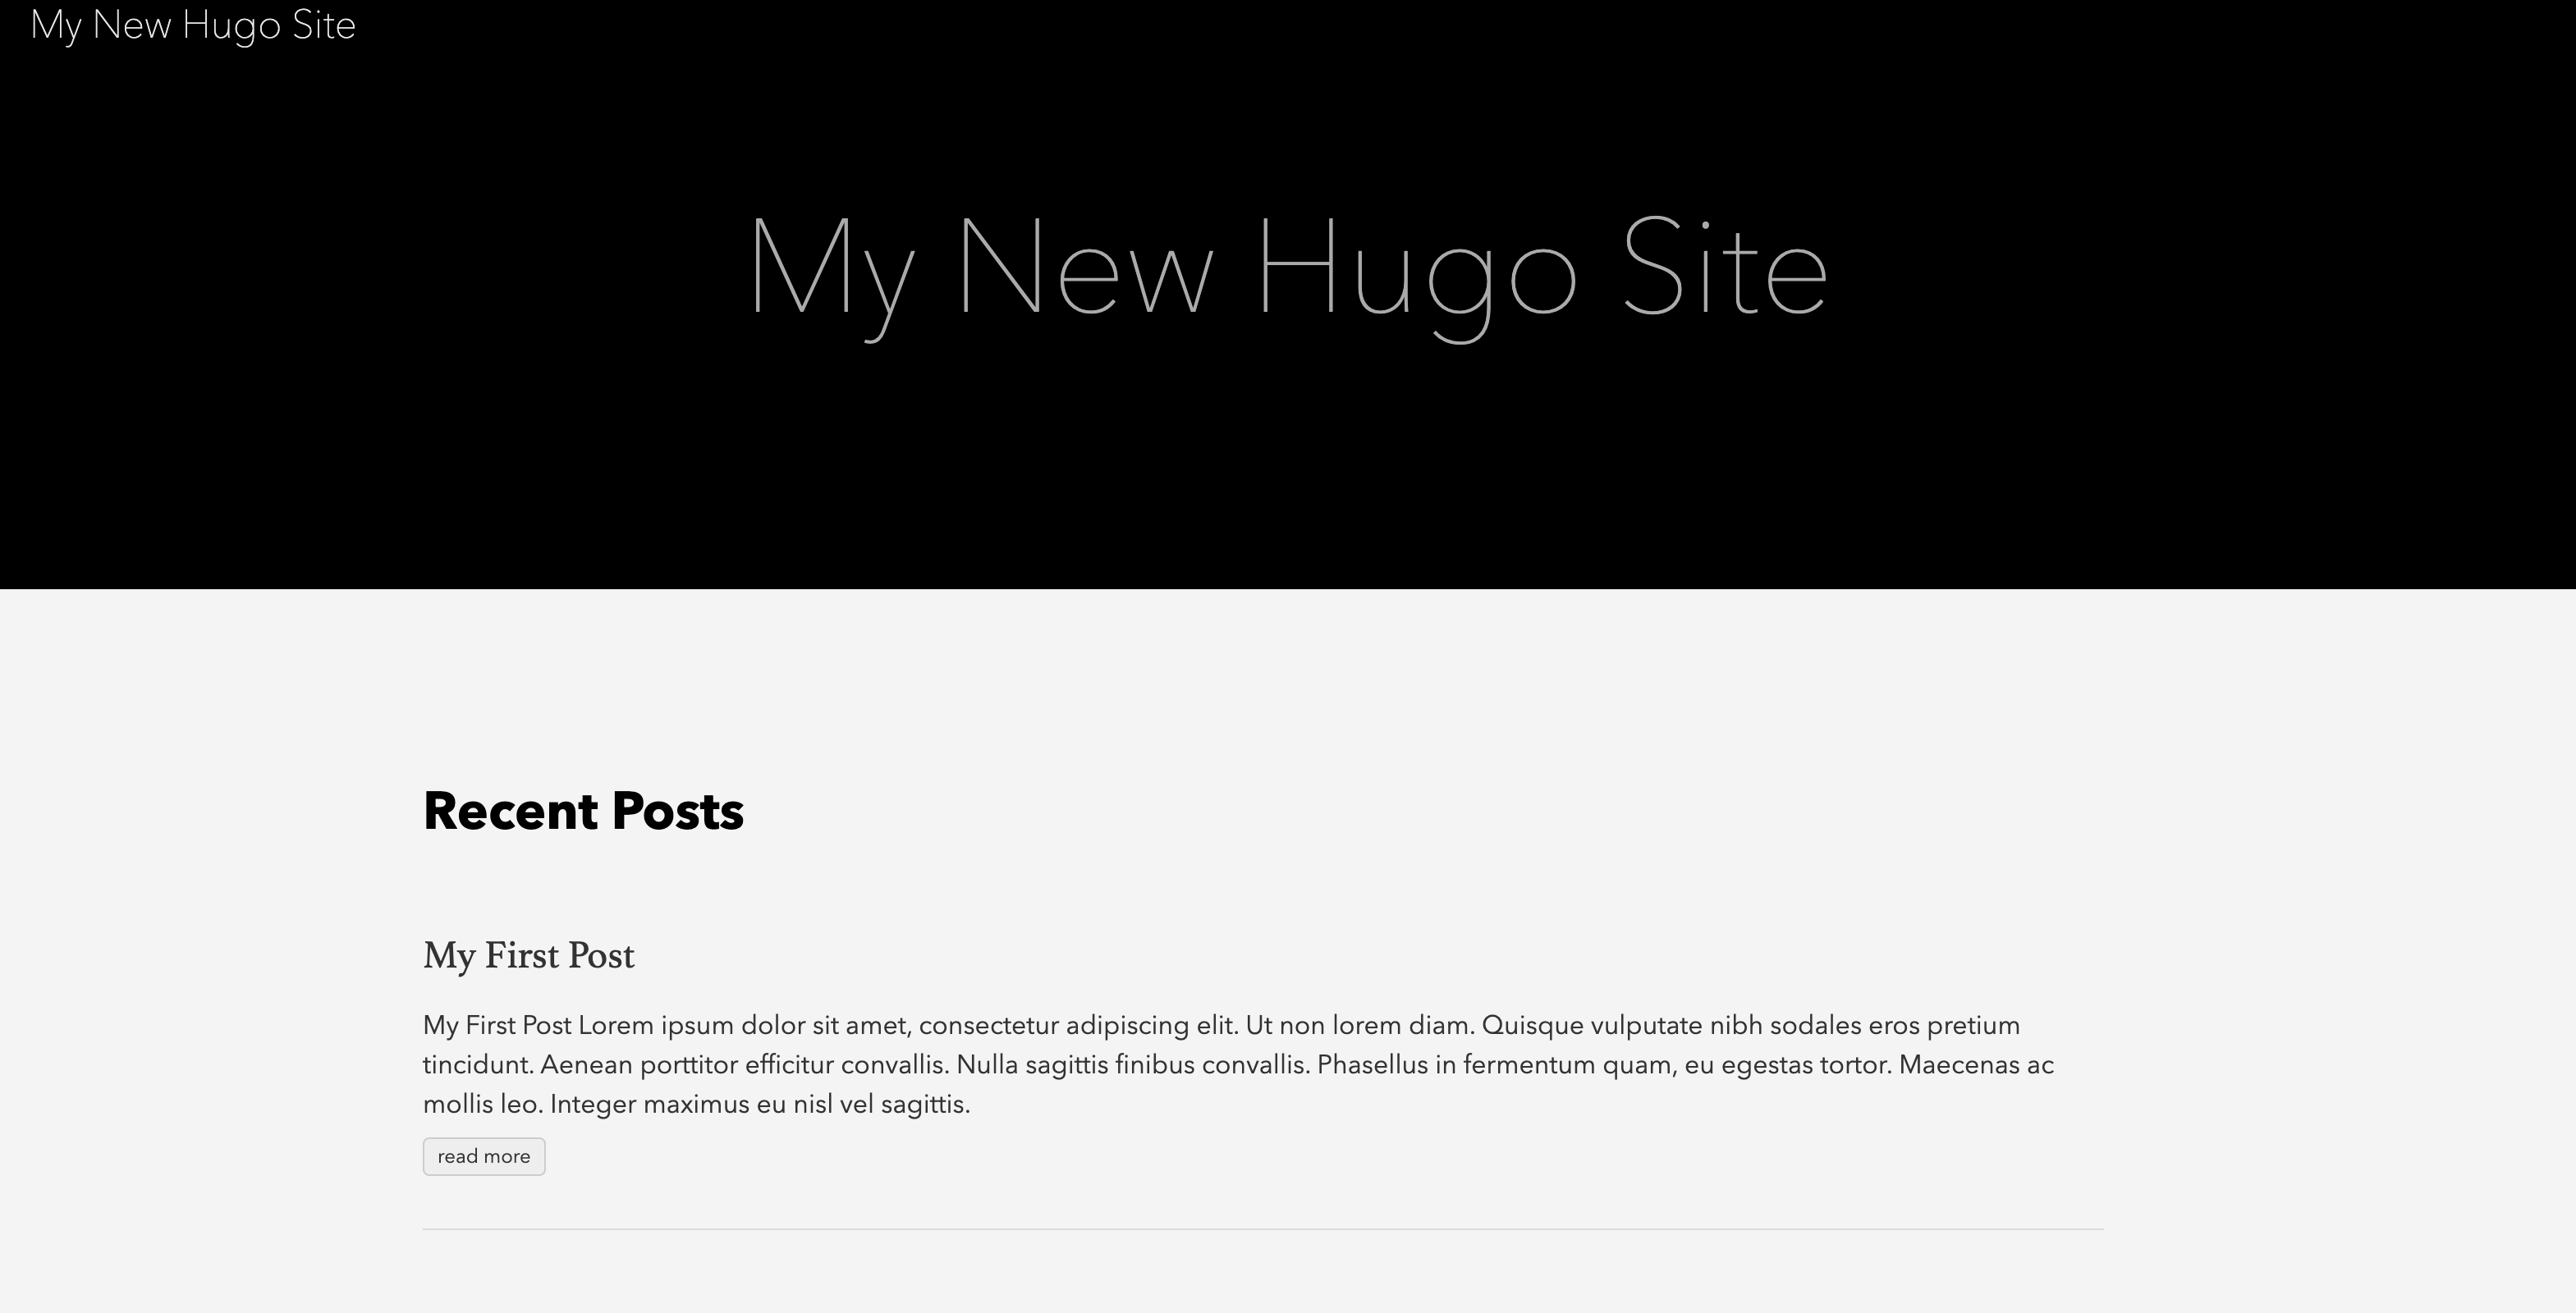 Screen shot of a website with the title “My New Hugo Site” and some Lorem Ipsum